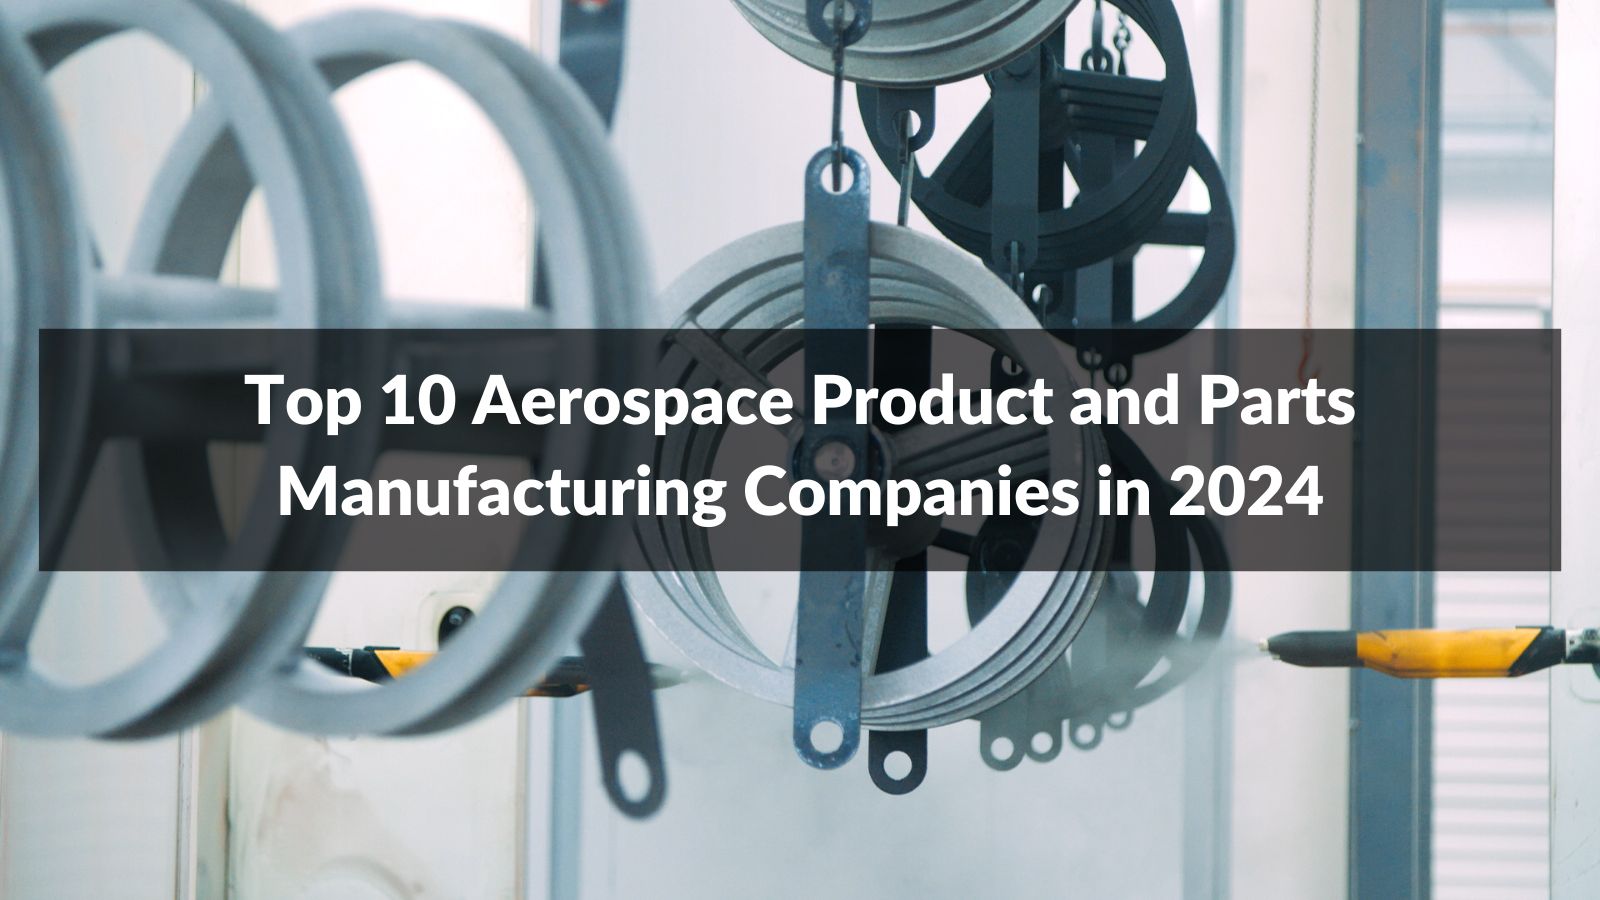 Top 10 Aerospace Product and Parts Manufacturing Companies in 2024